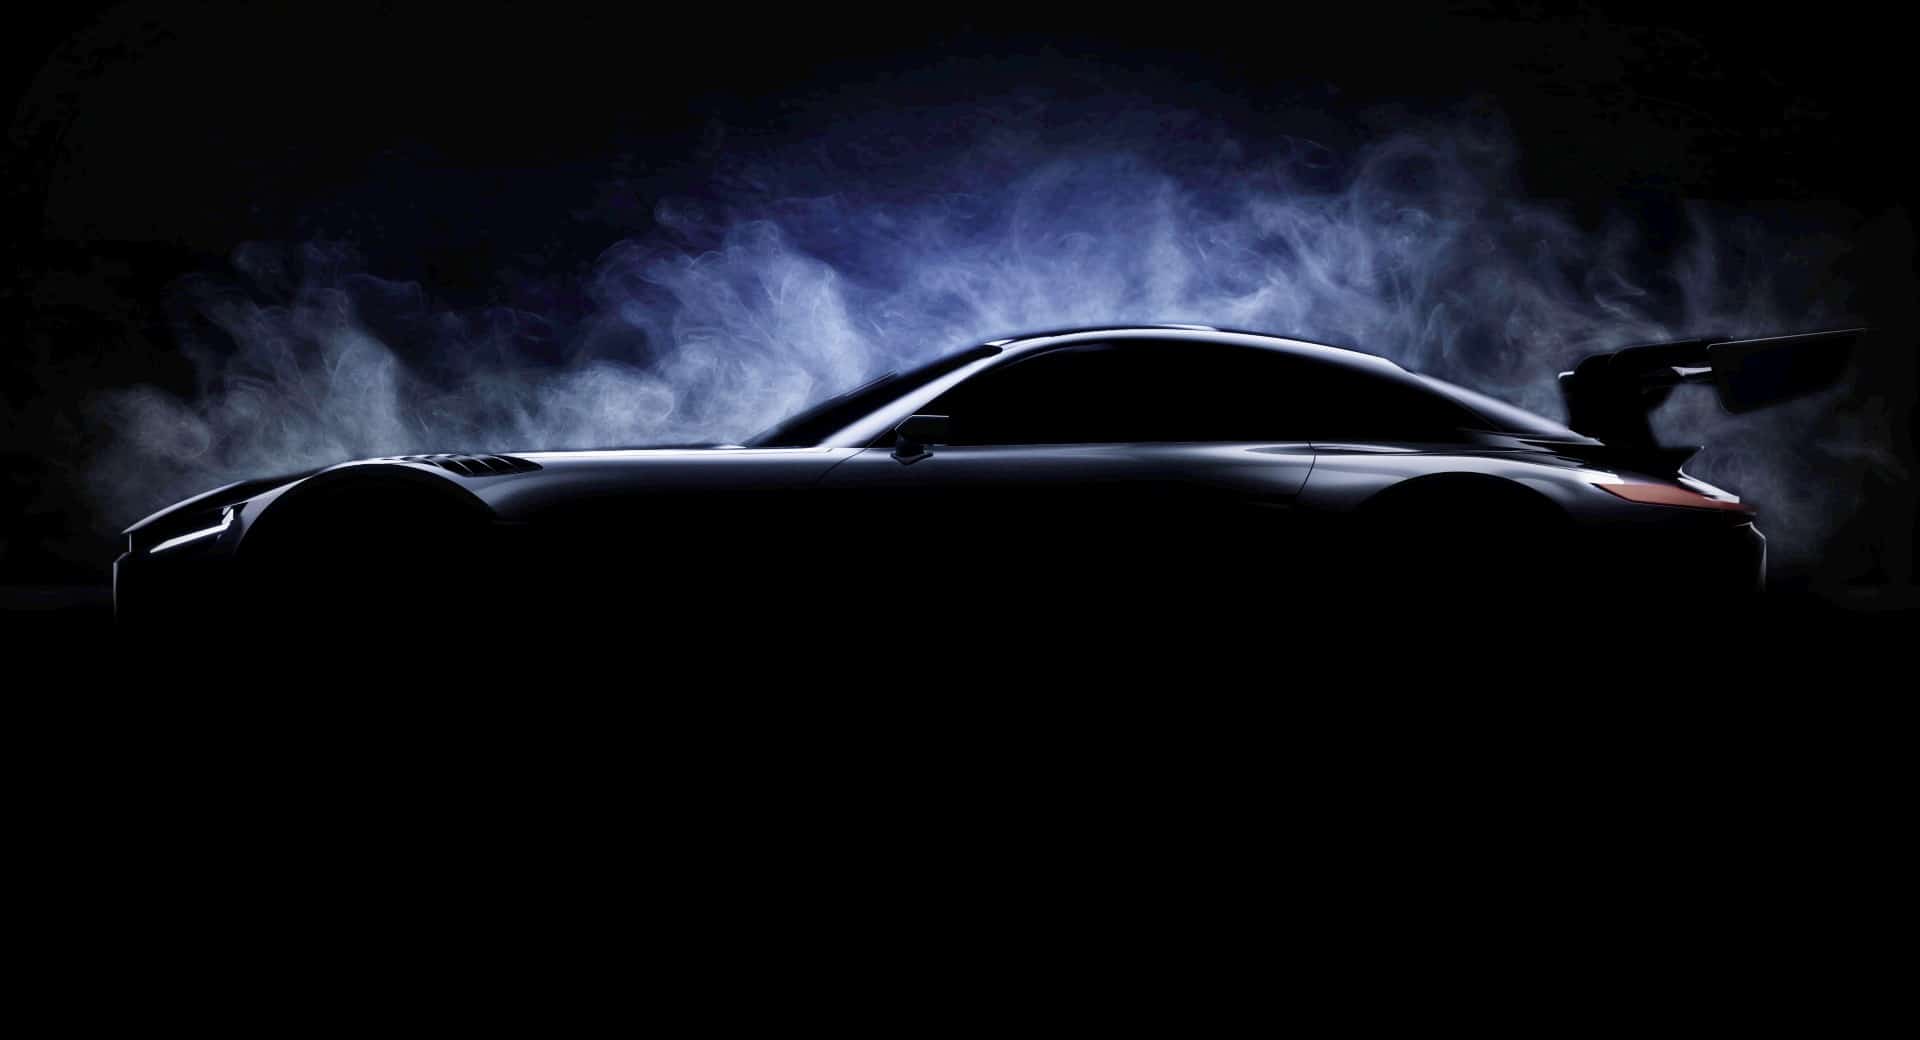 We will see a spicier Toyota GR Yaris at the Tokyo Motor Show